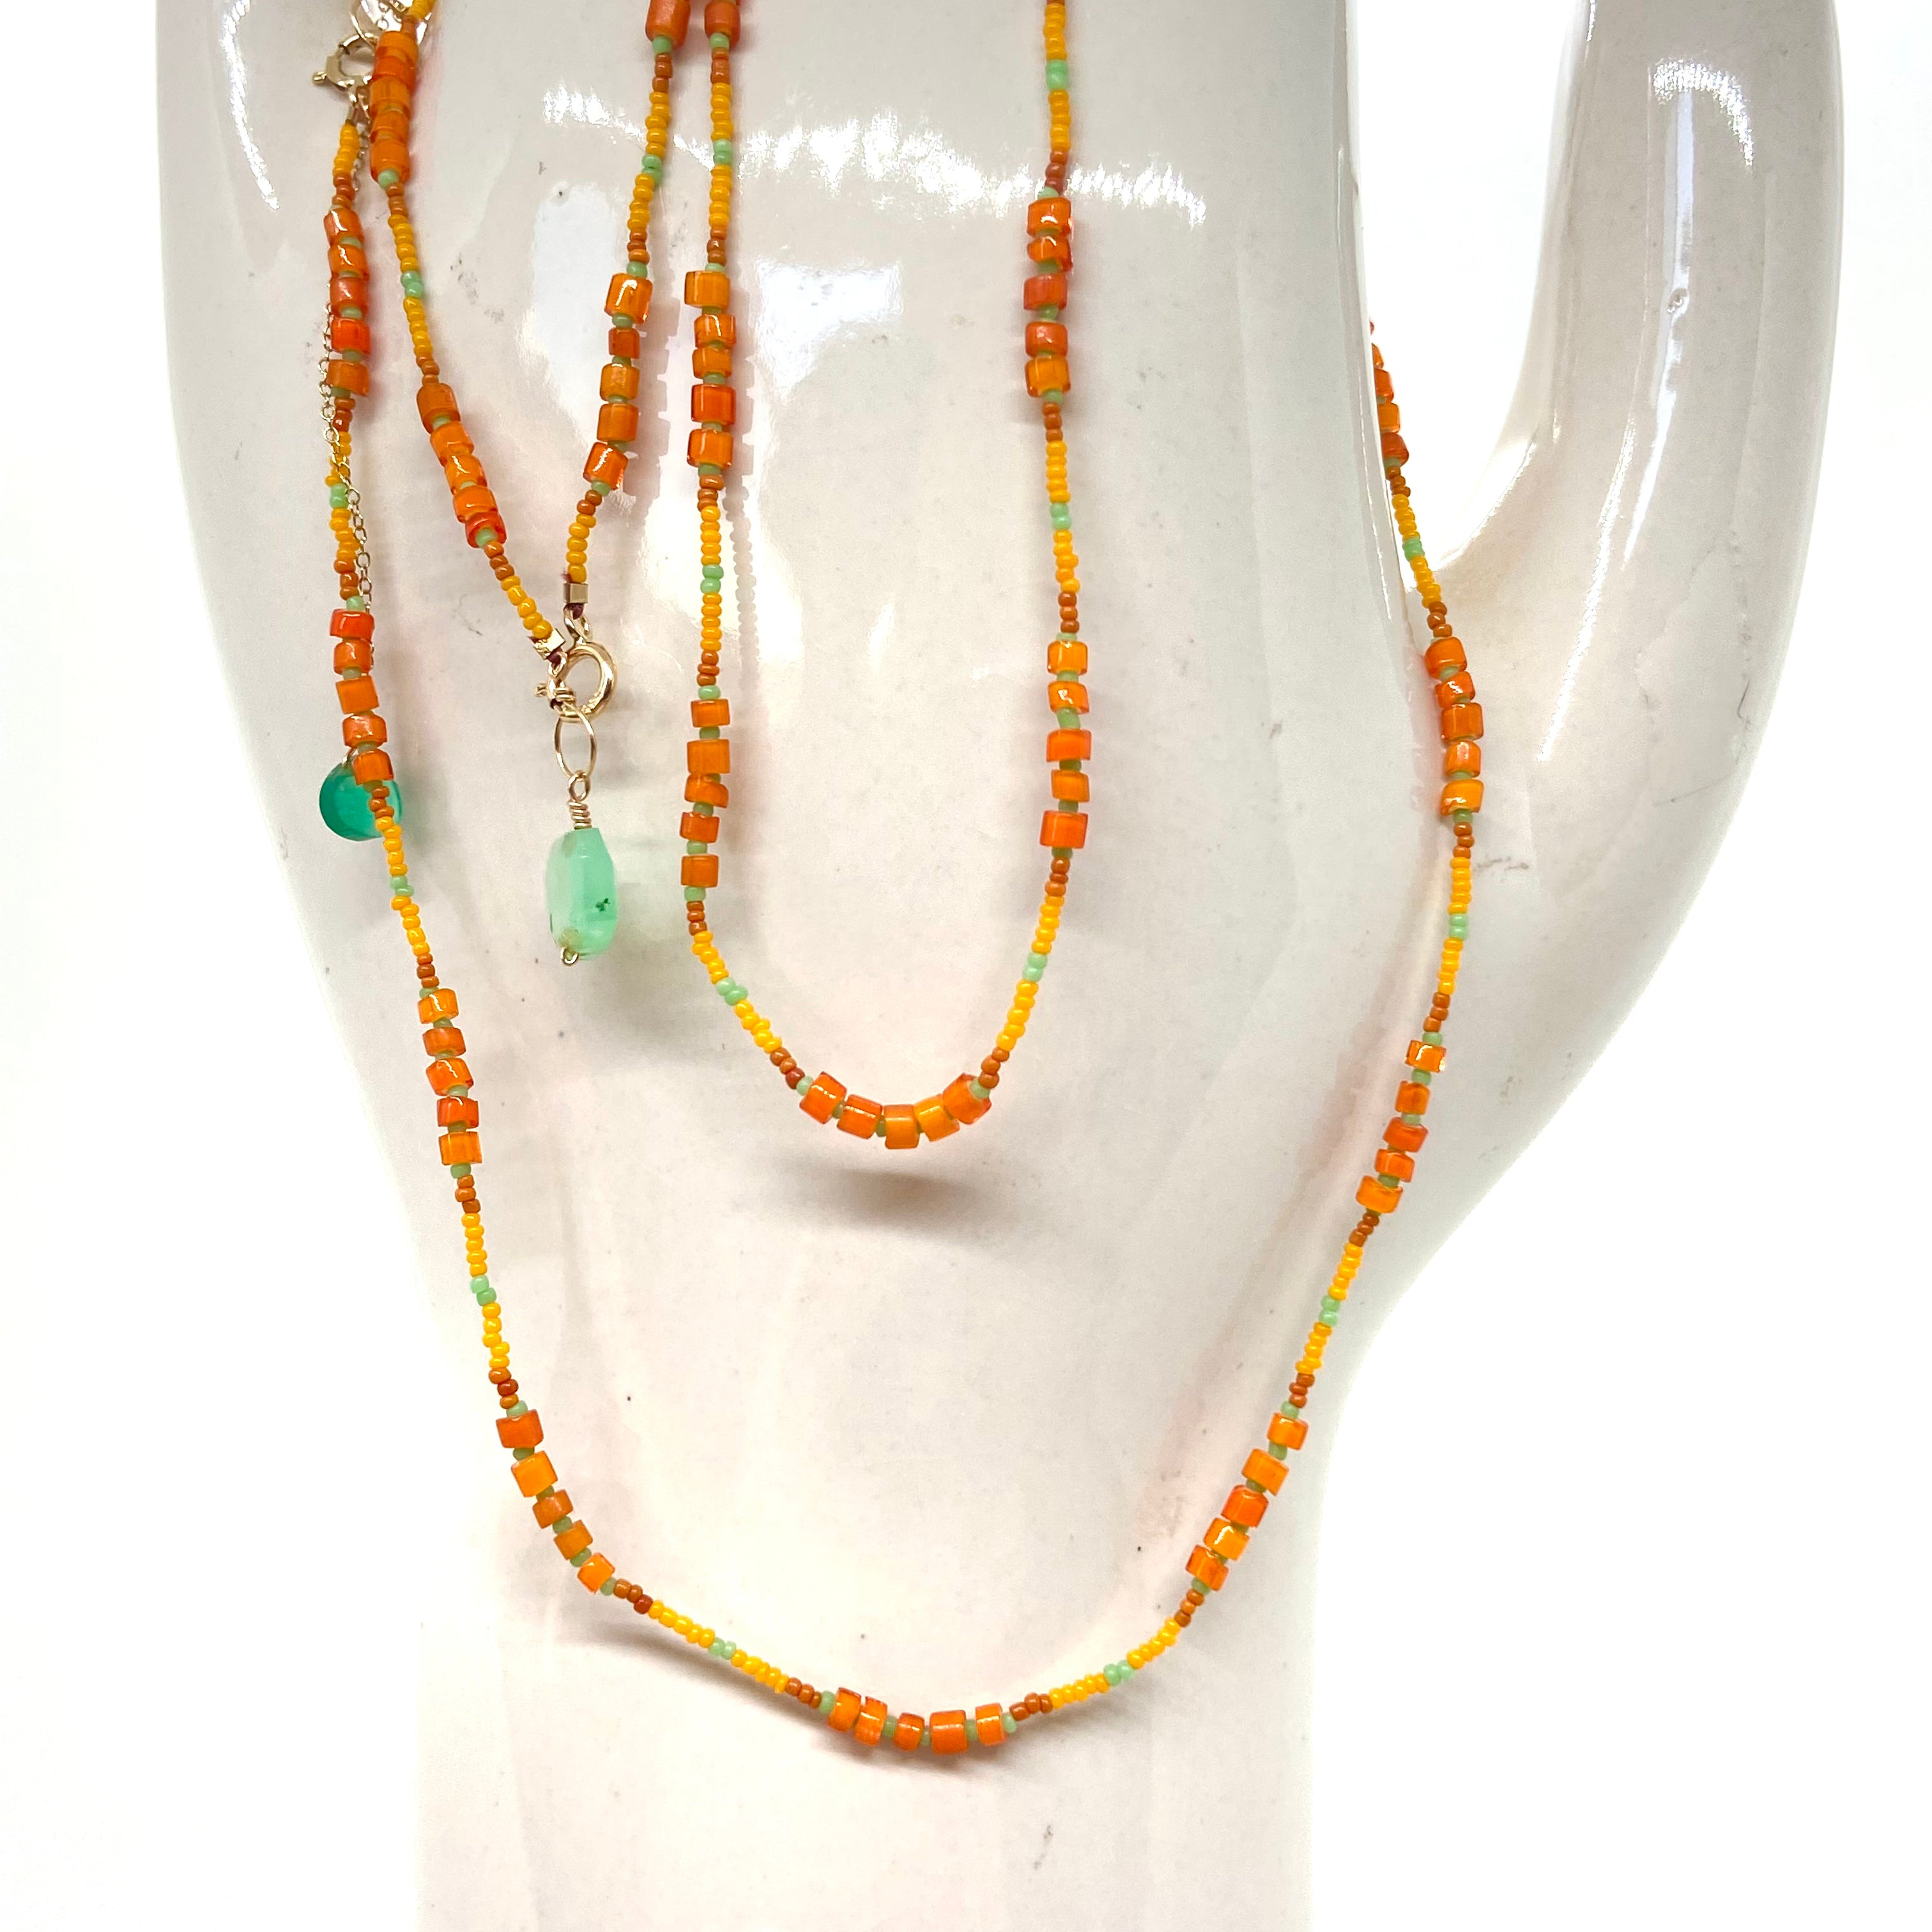 String Beaded Necklace w/ Antique Italian Beads